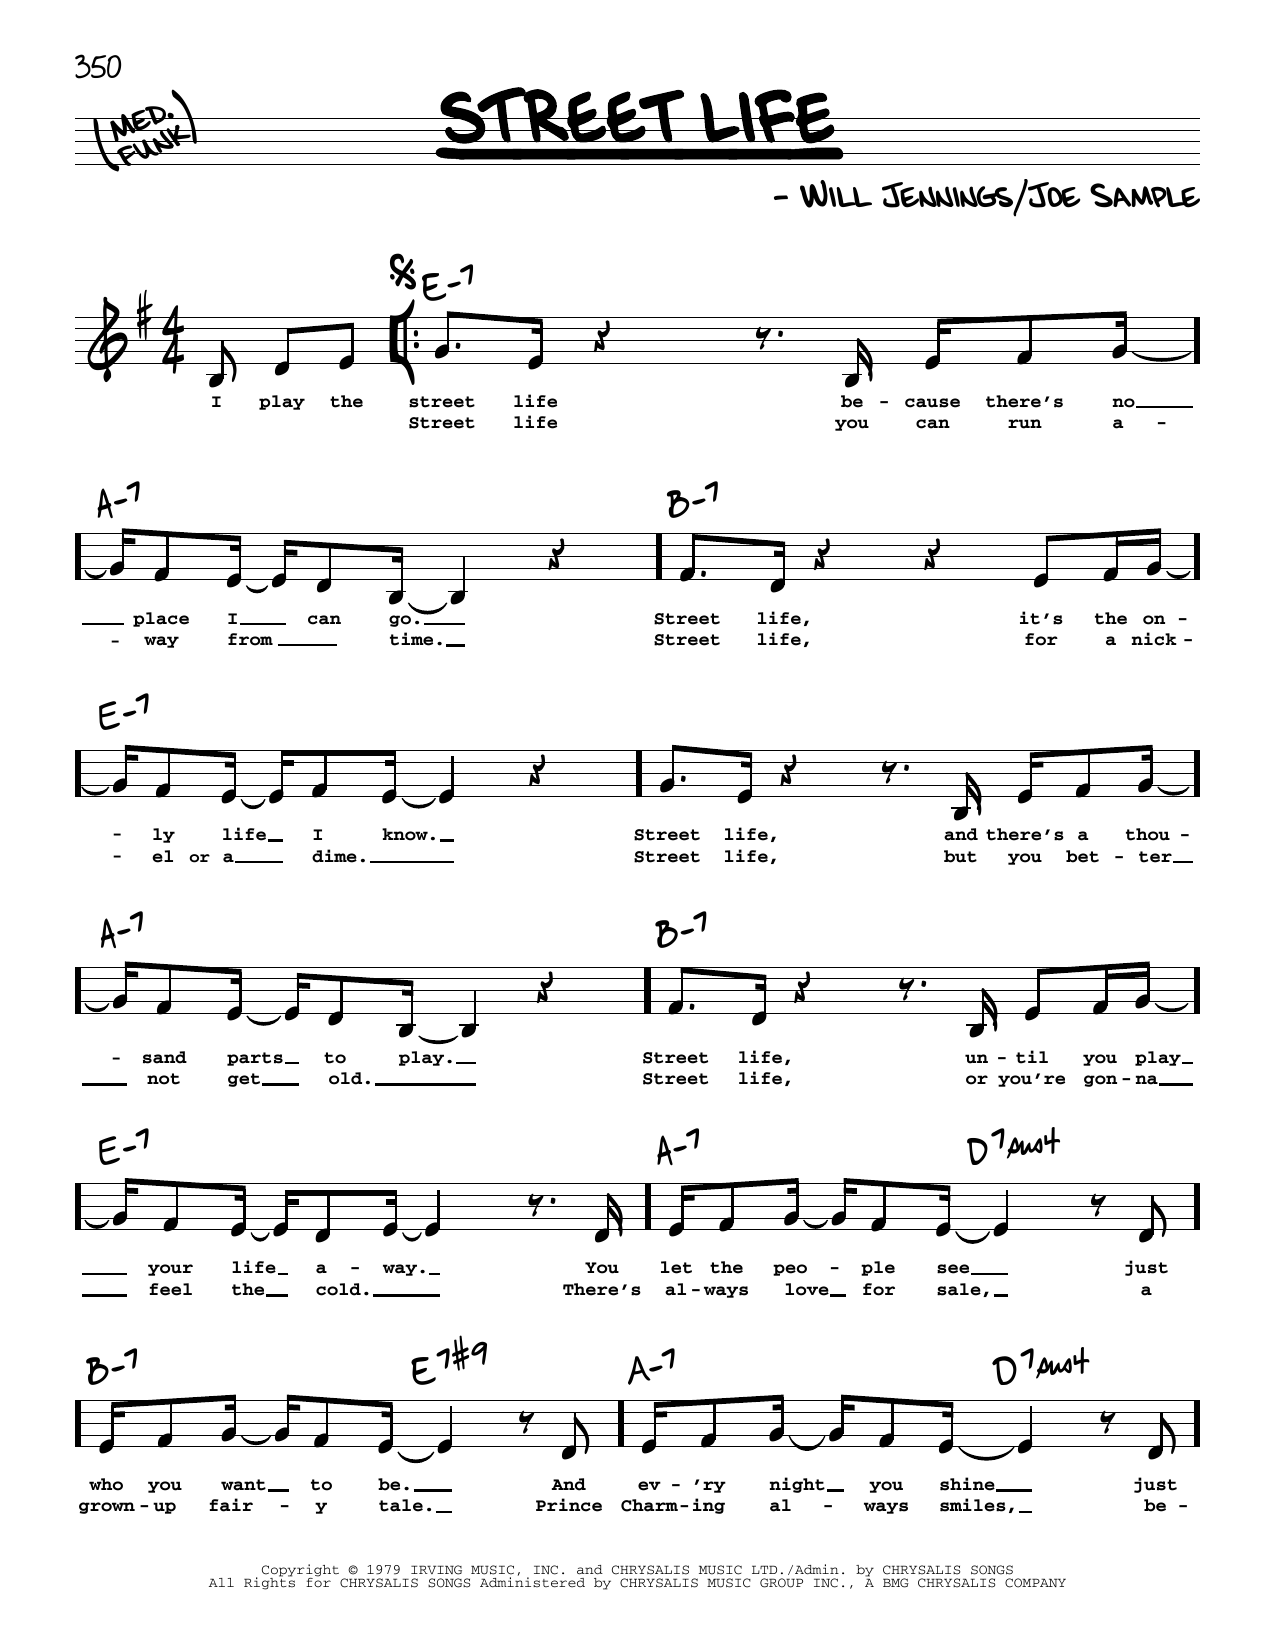 The Crusaders Street Life (Low Voice) sheet music notes printable PDF score